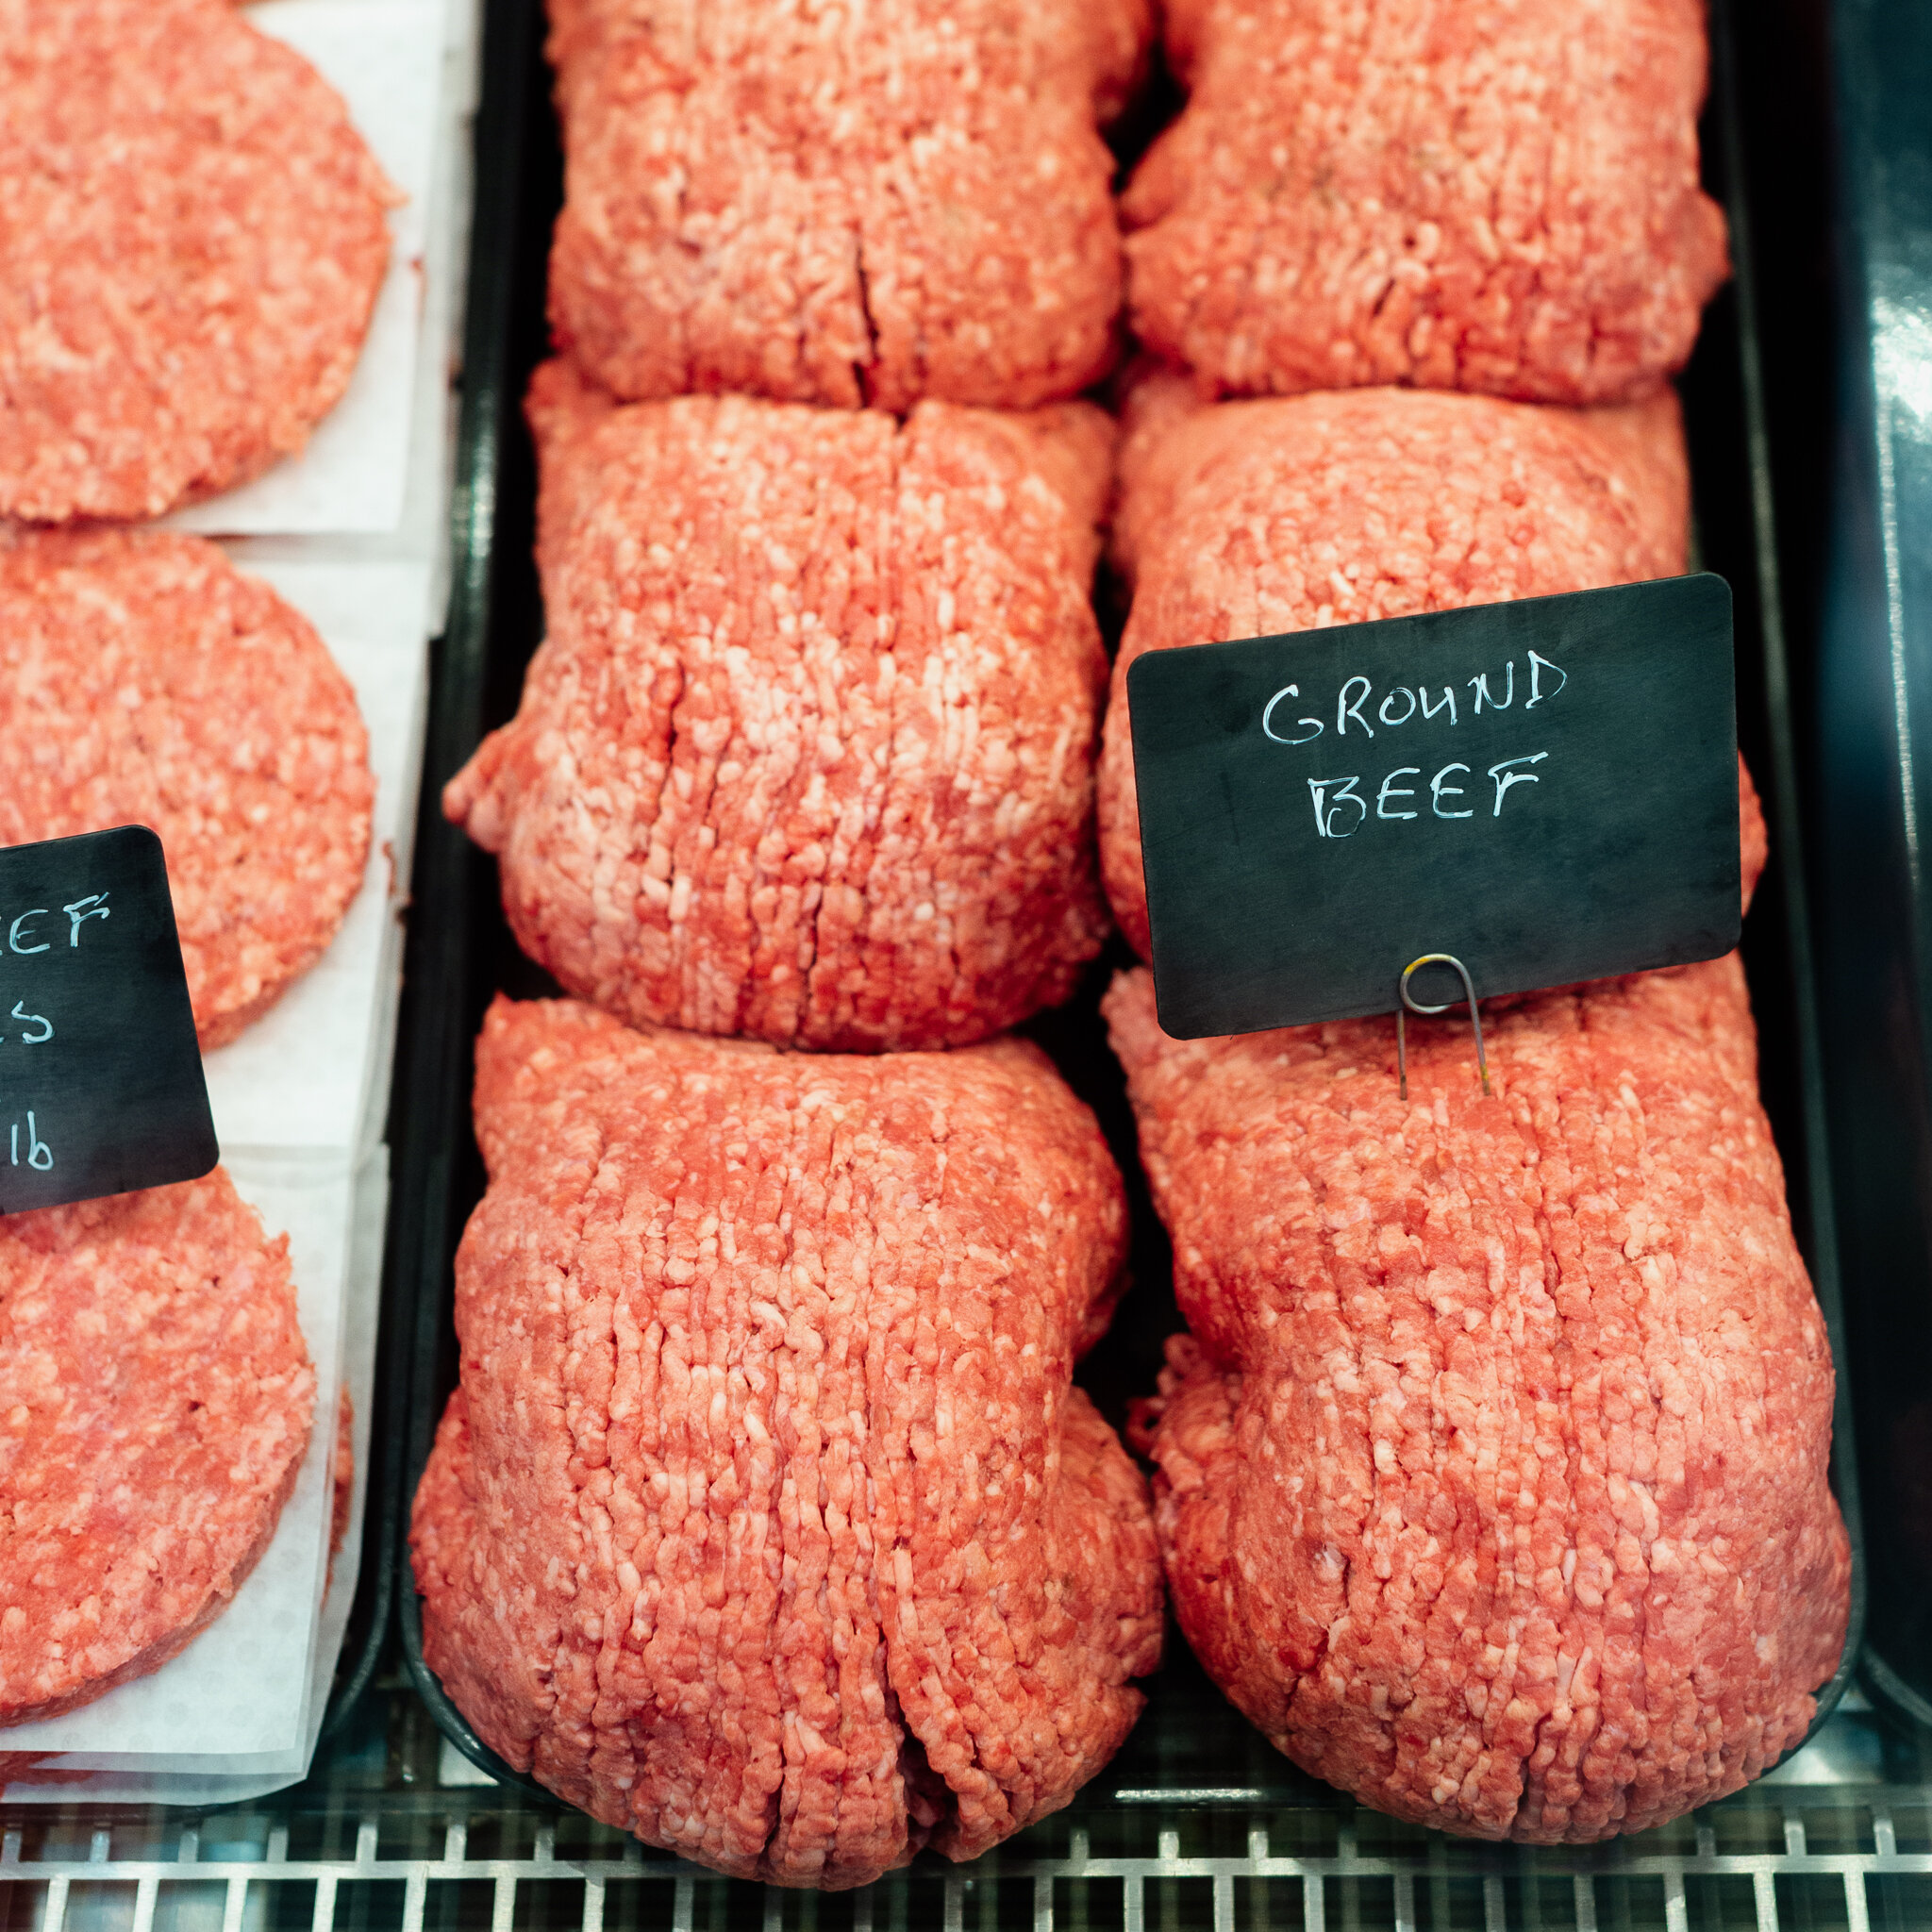 ❗️WE WANT TO KNOW❗️

What are your favorite ground beef products at the shop?

- ground beef (plain by a pound)
- gourmet burger patties
- meatballs
- meatloaf
- snack sticks
- summer sausage
-_________________ ⬅ YOU TELL US!

Let us know in the comm